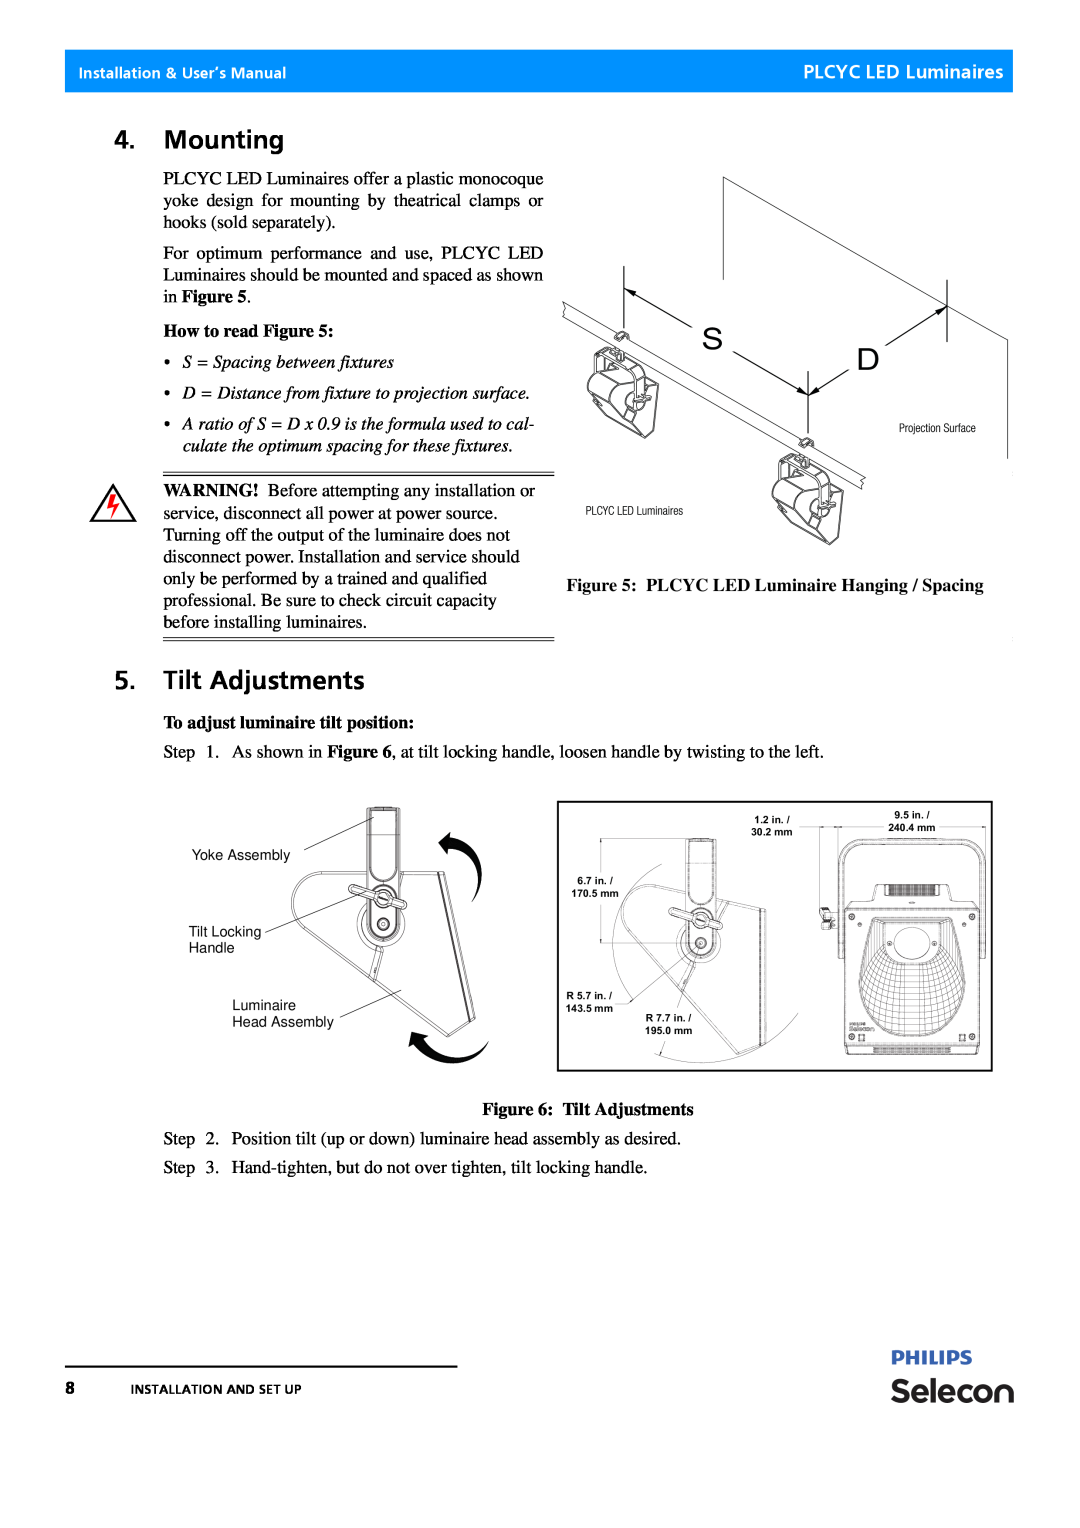 Philips Selecon manual Mounting, Tilt Adjustments, How to read Figure, •S = Spacing between fixtures, PLCYC LED Luminaires 